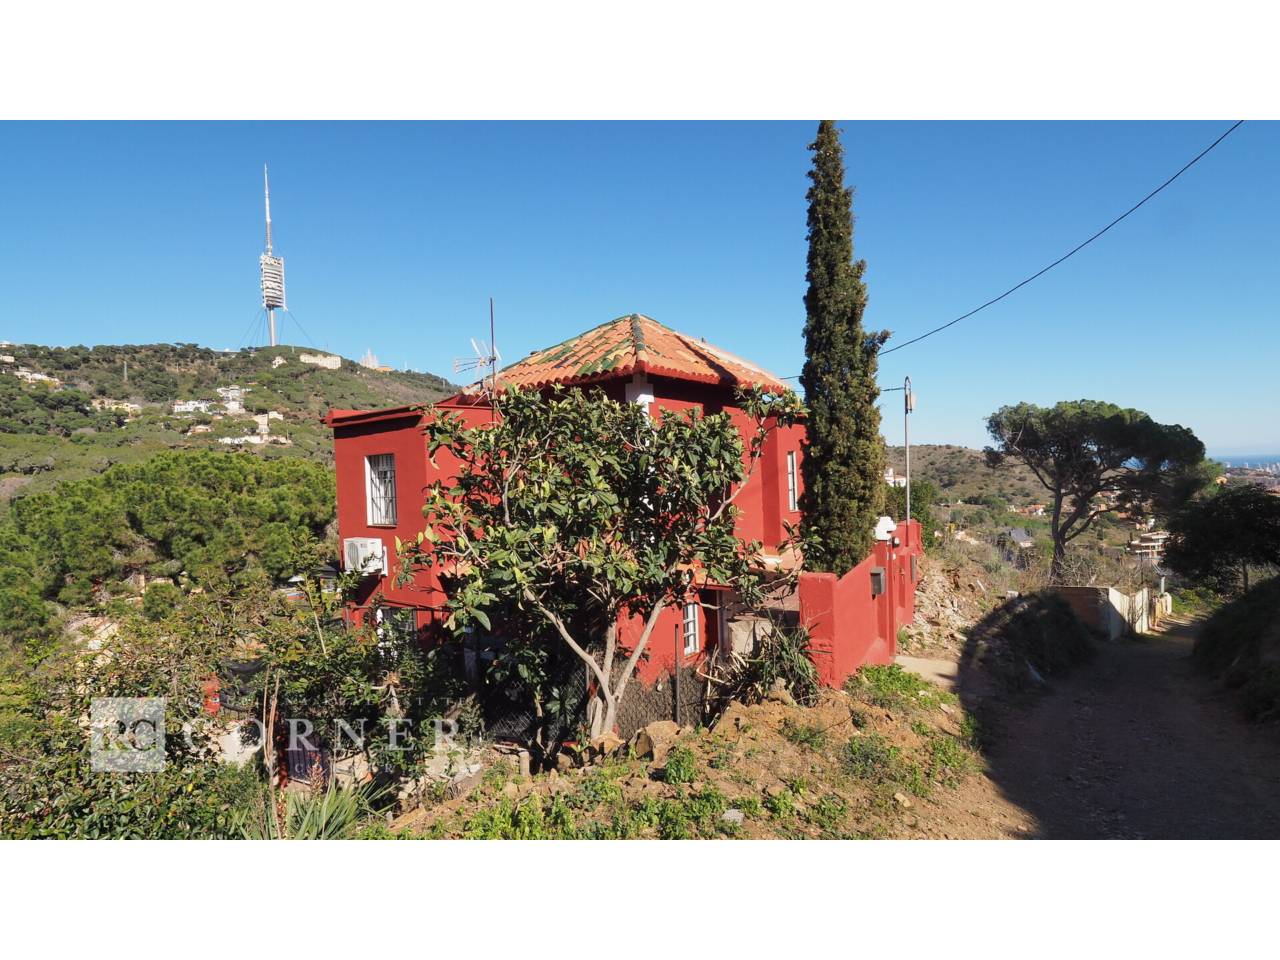 House from the year 1900 with views of Barcelona, in Sarrià.